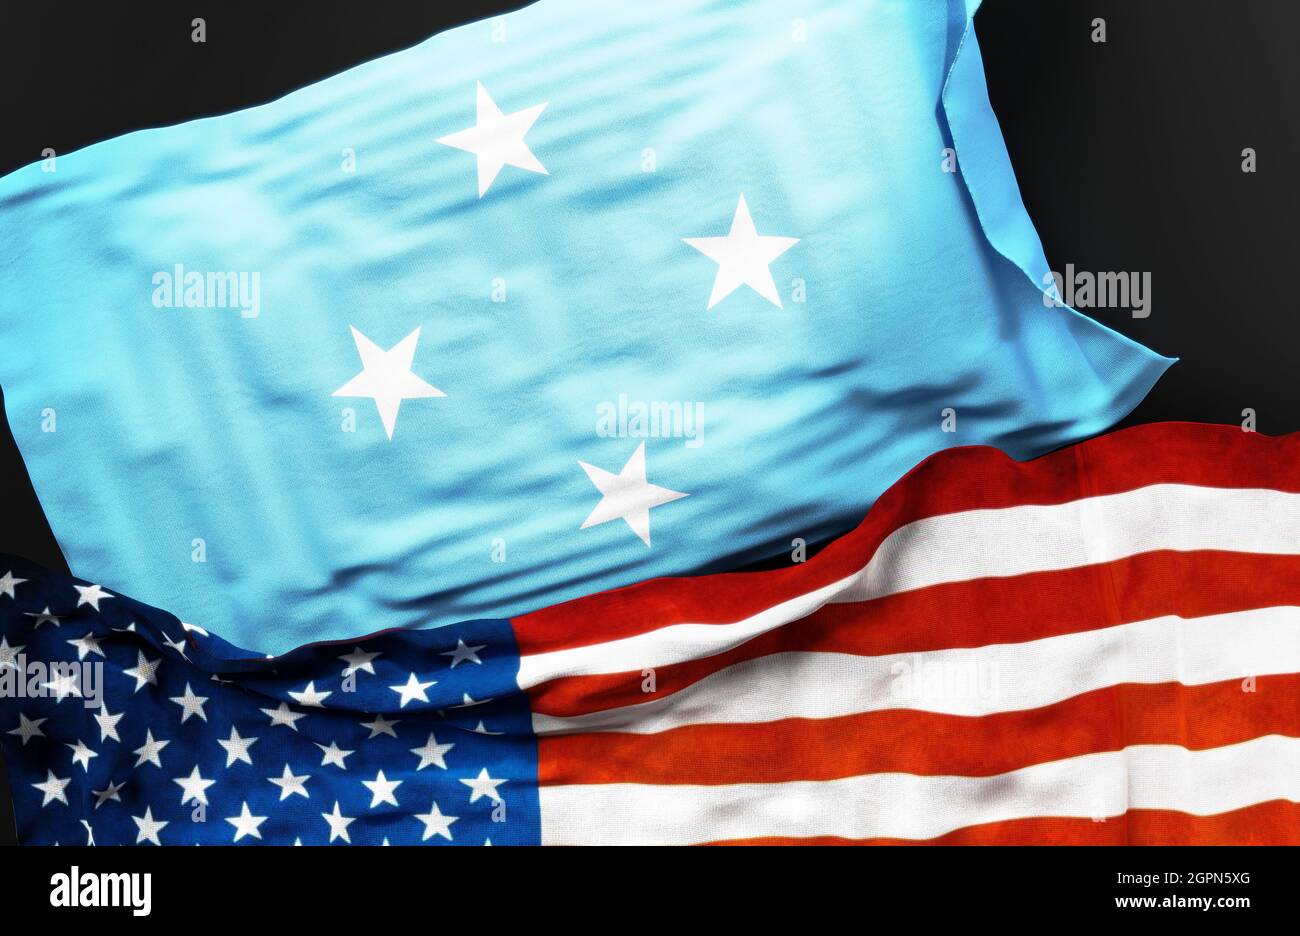 Flag of the Federated States of Micronesia along with a flag of the United States of America as a symbol of unity between them, 3d illustration Stock Photo